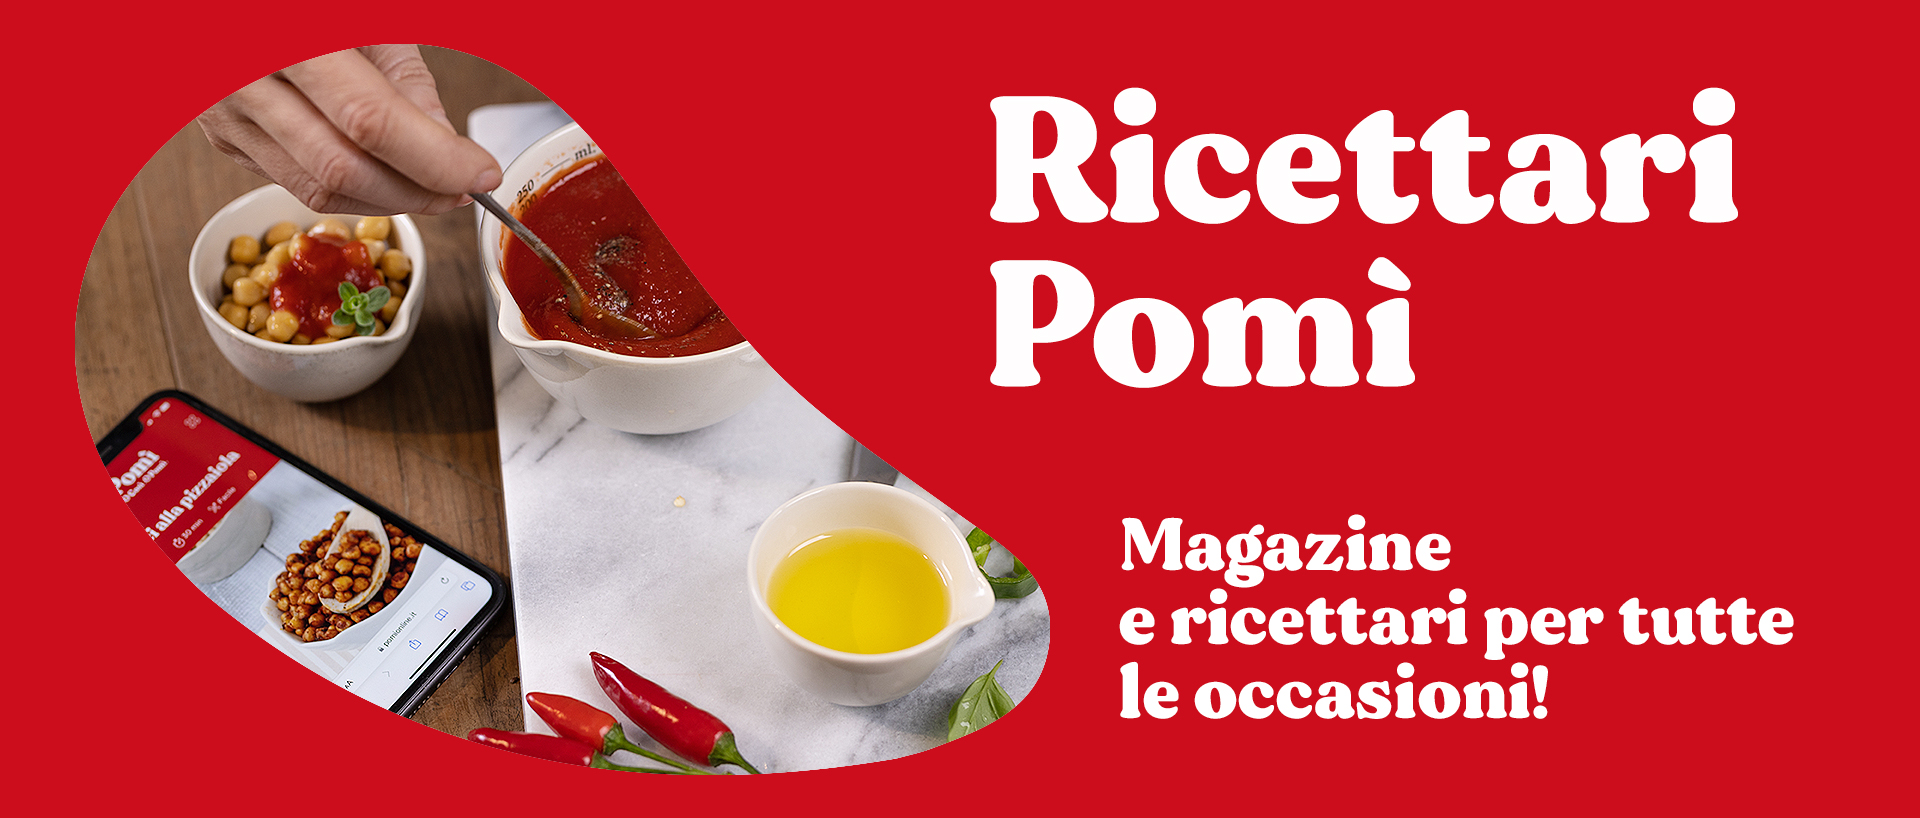 Ricette gustose